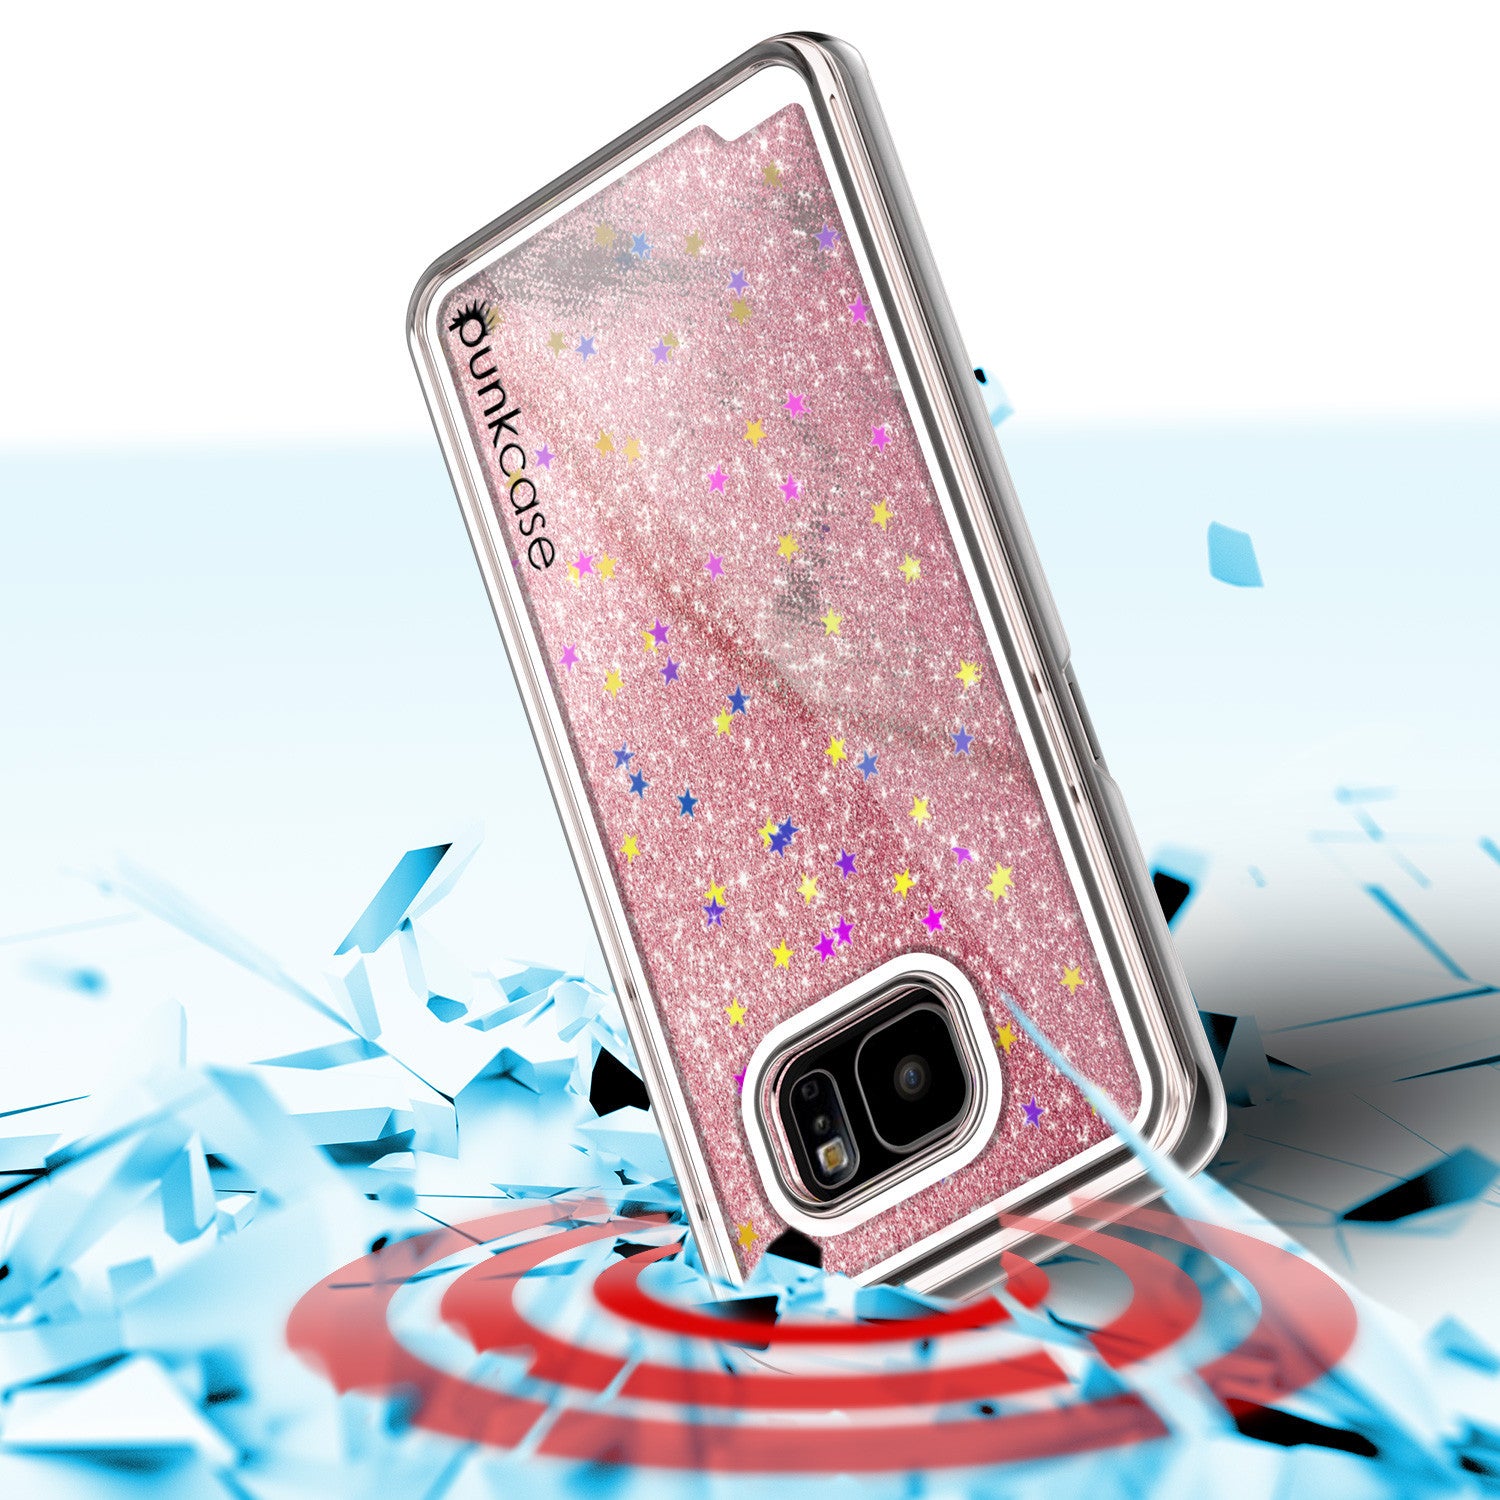 Samsung Galaxy S7 Edge Case, Punkcase [Liquid Rose Series] Protective Dual Layer Floating Glitter Cover + PunkShield Screen Protector